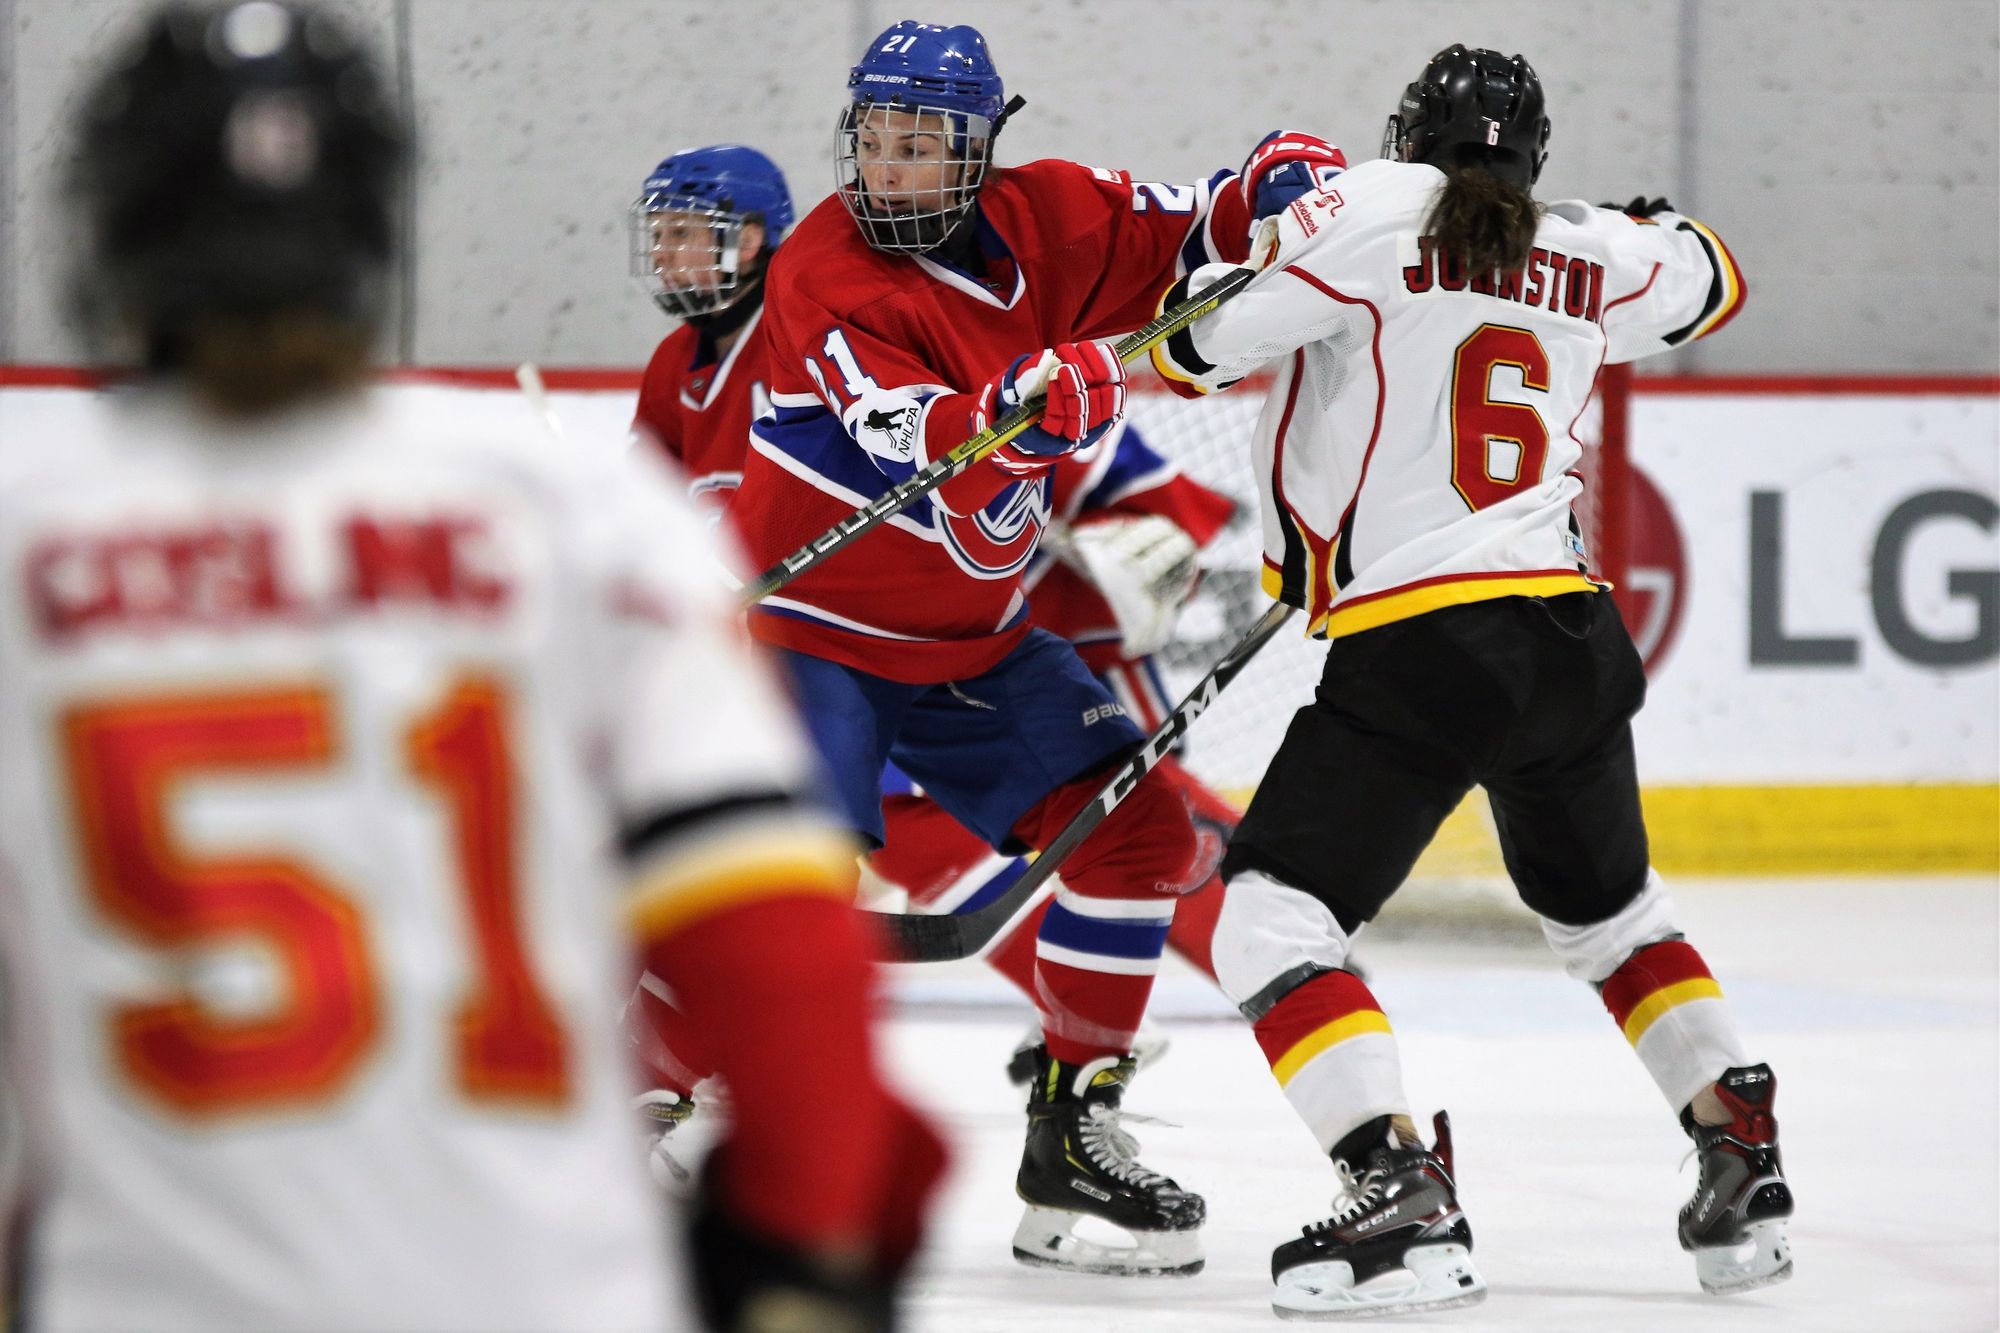 CWHL: 2019 Clarkson Cup Final Preview